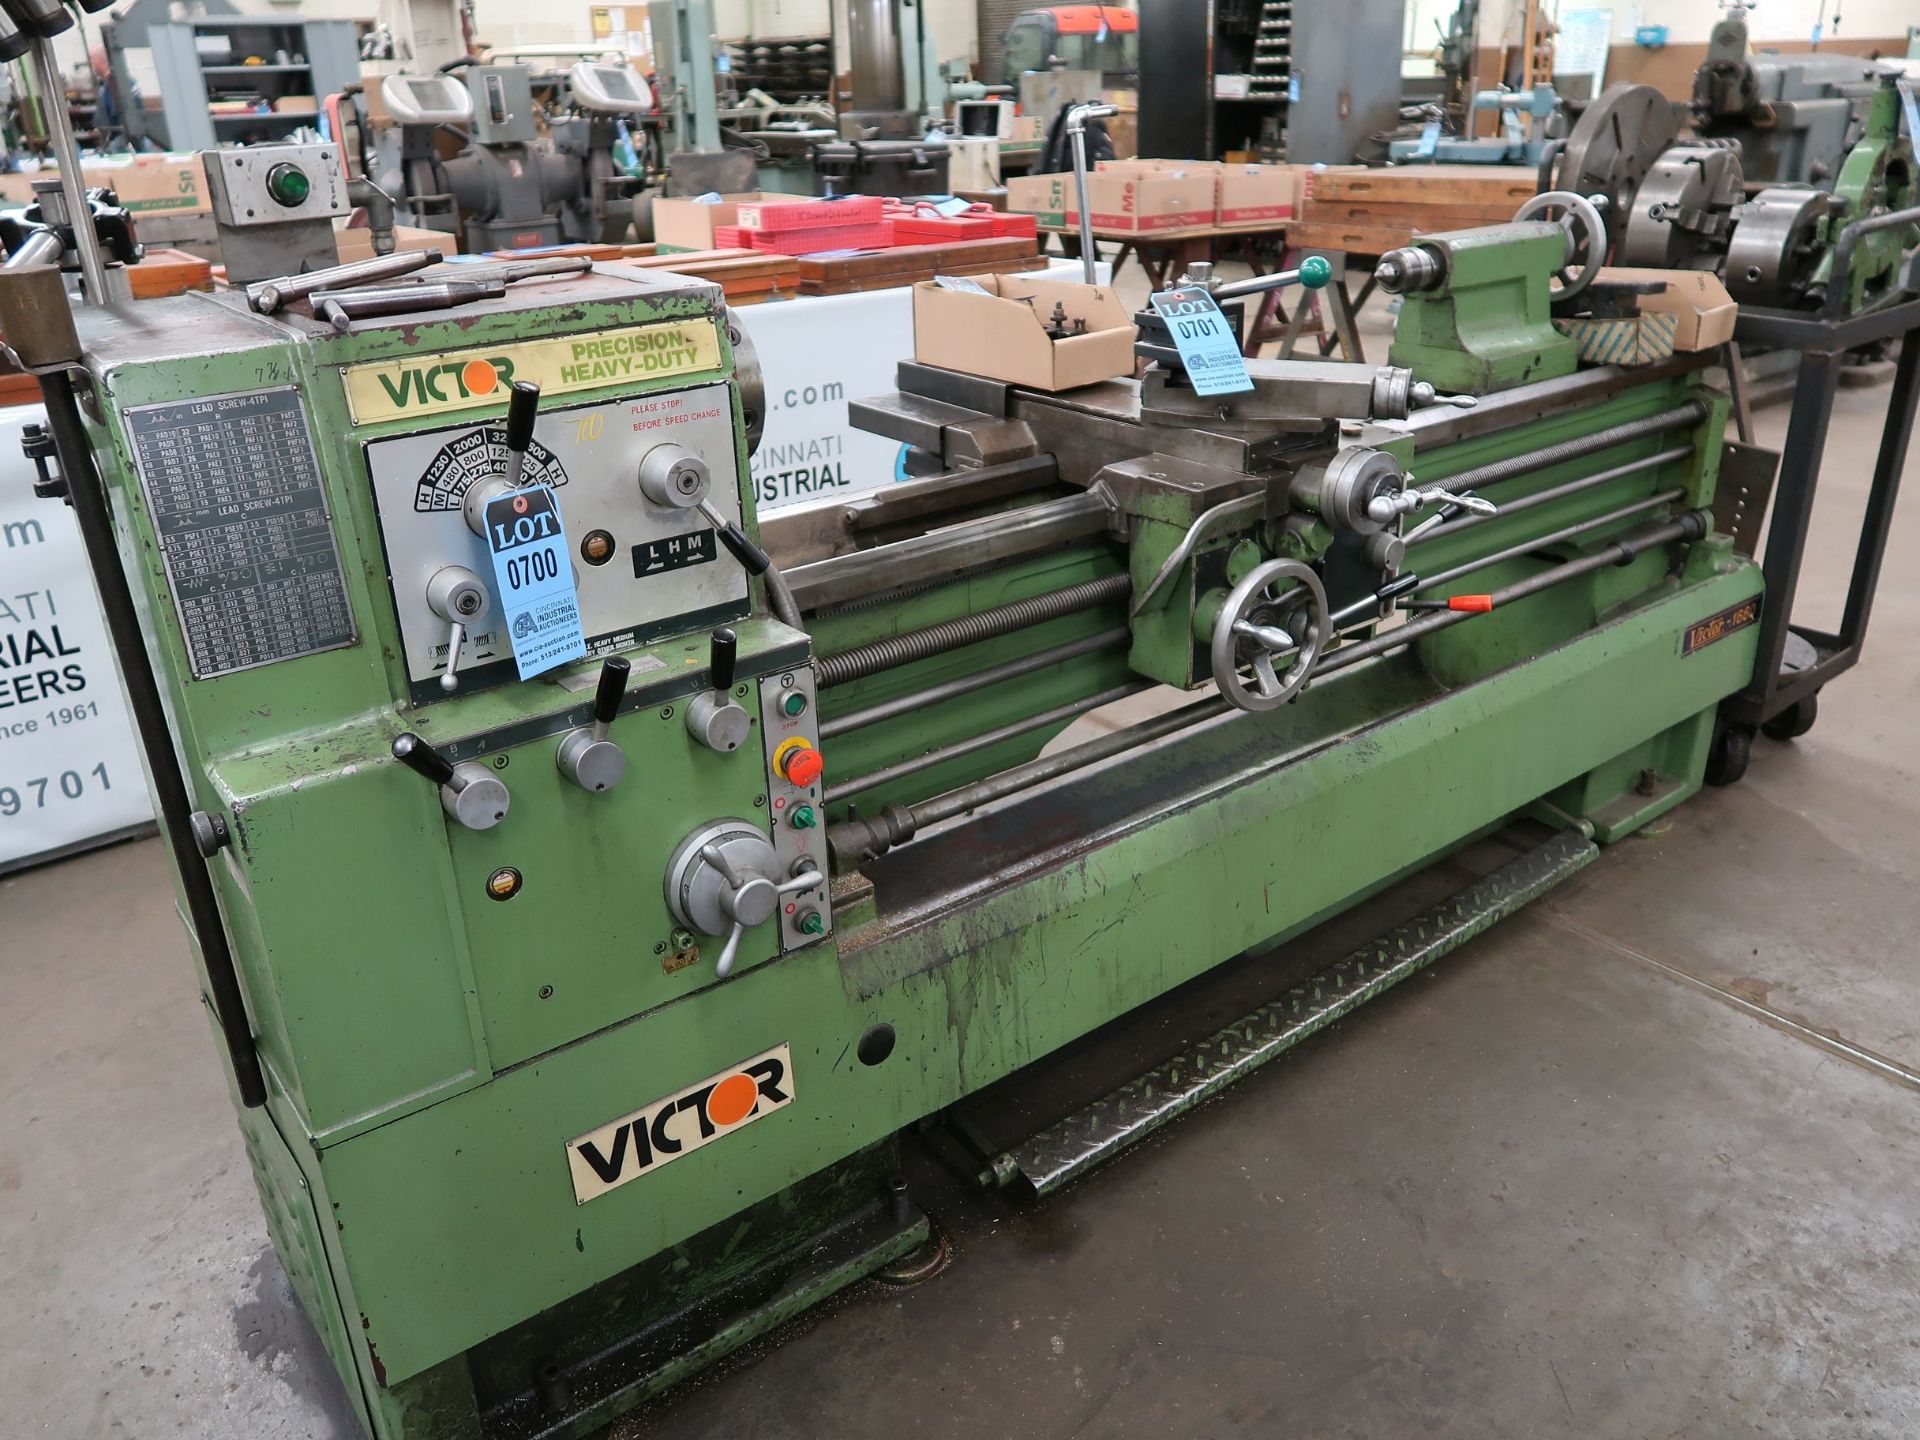 16" X 60" VICTOR MODEL 1660E GEARED HEAD ENGINE LATHE; S/N 971208, SPINDLE SPEED 40-2,000 RPM, TAPER